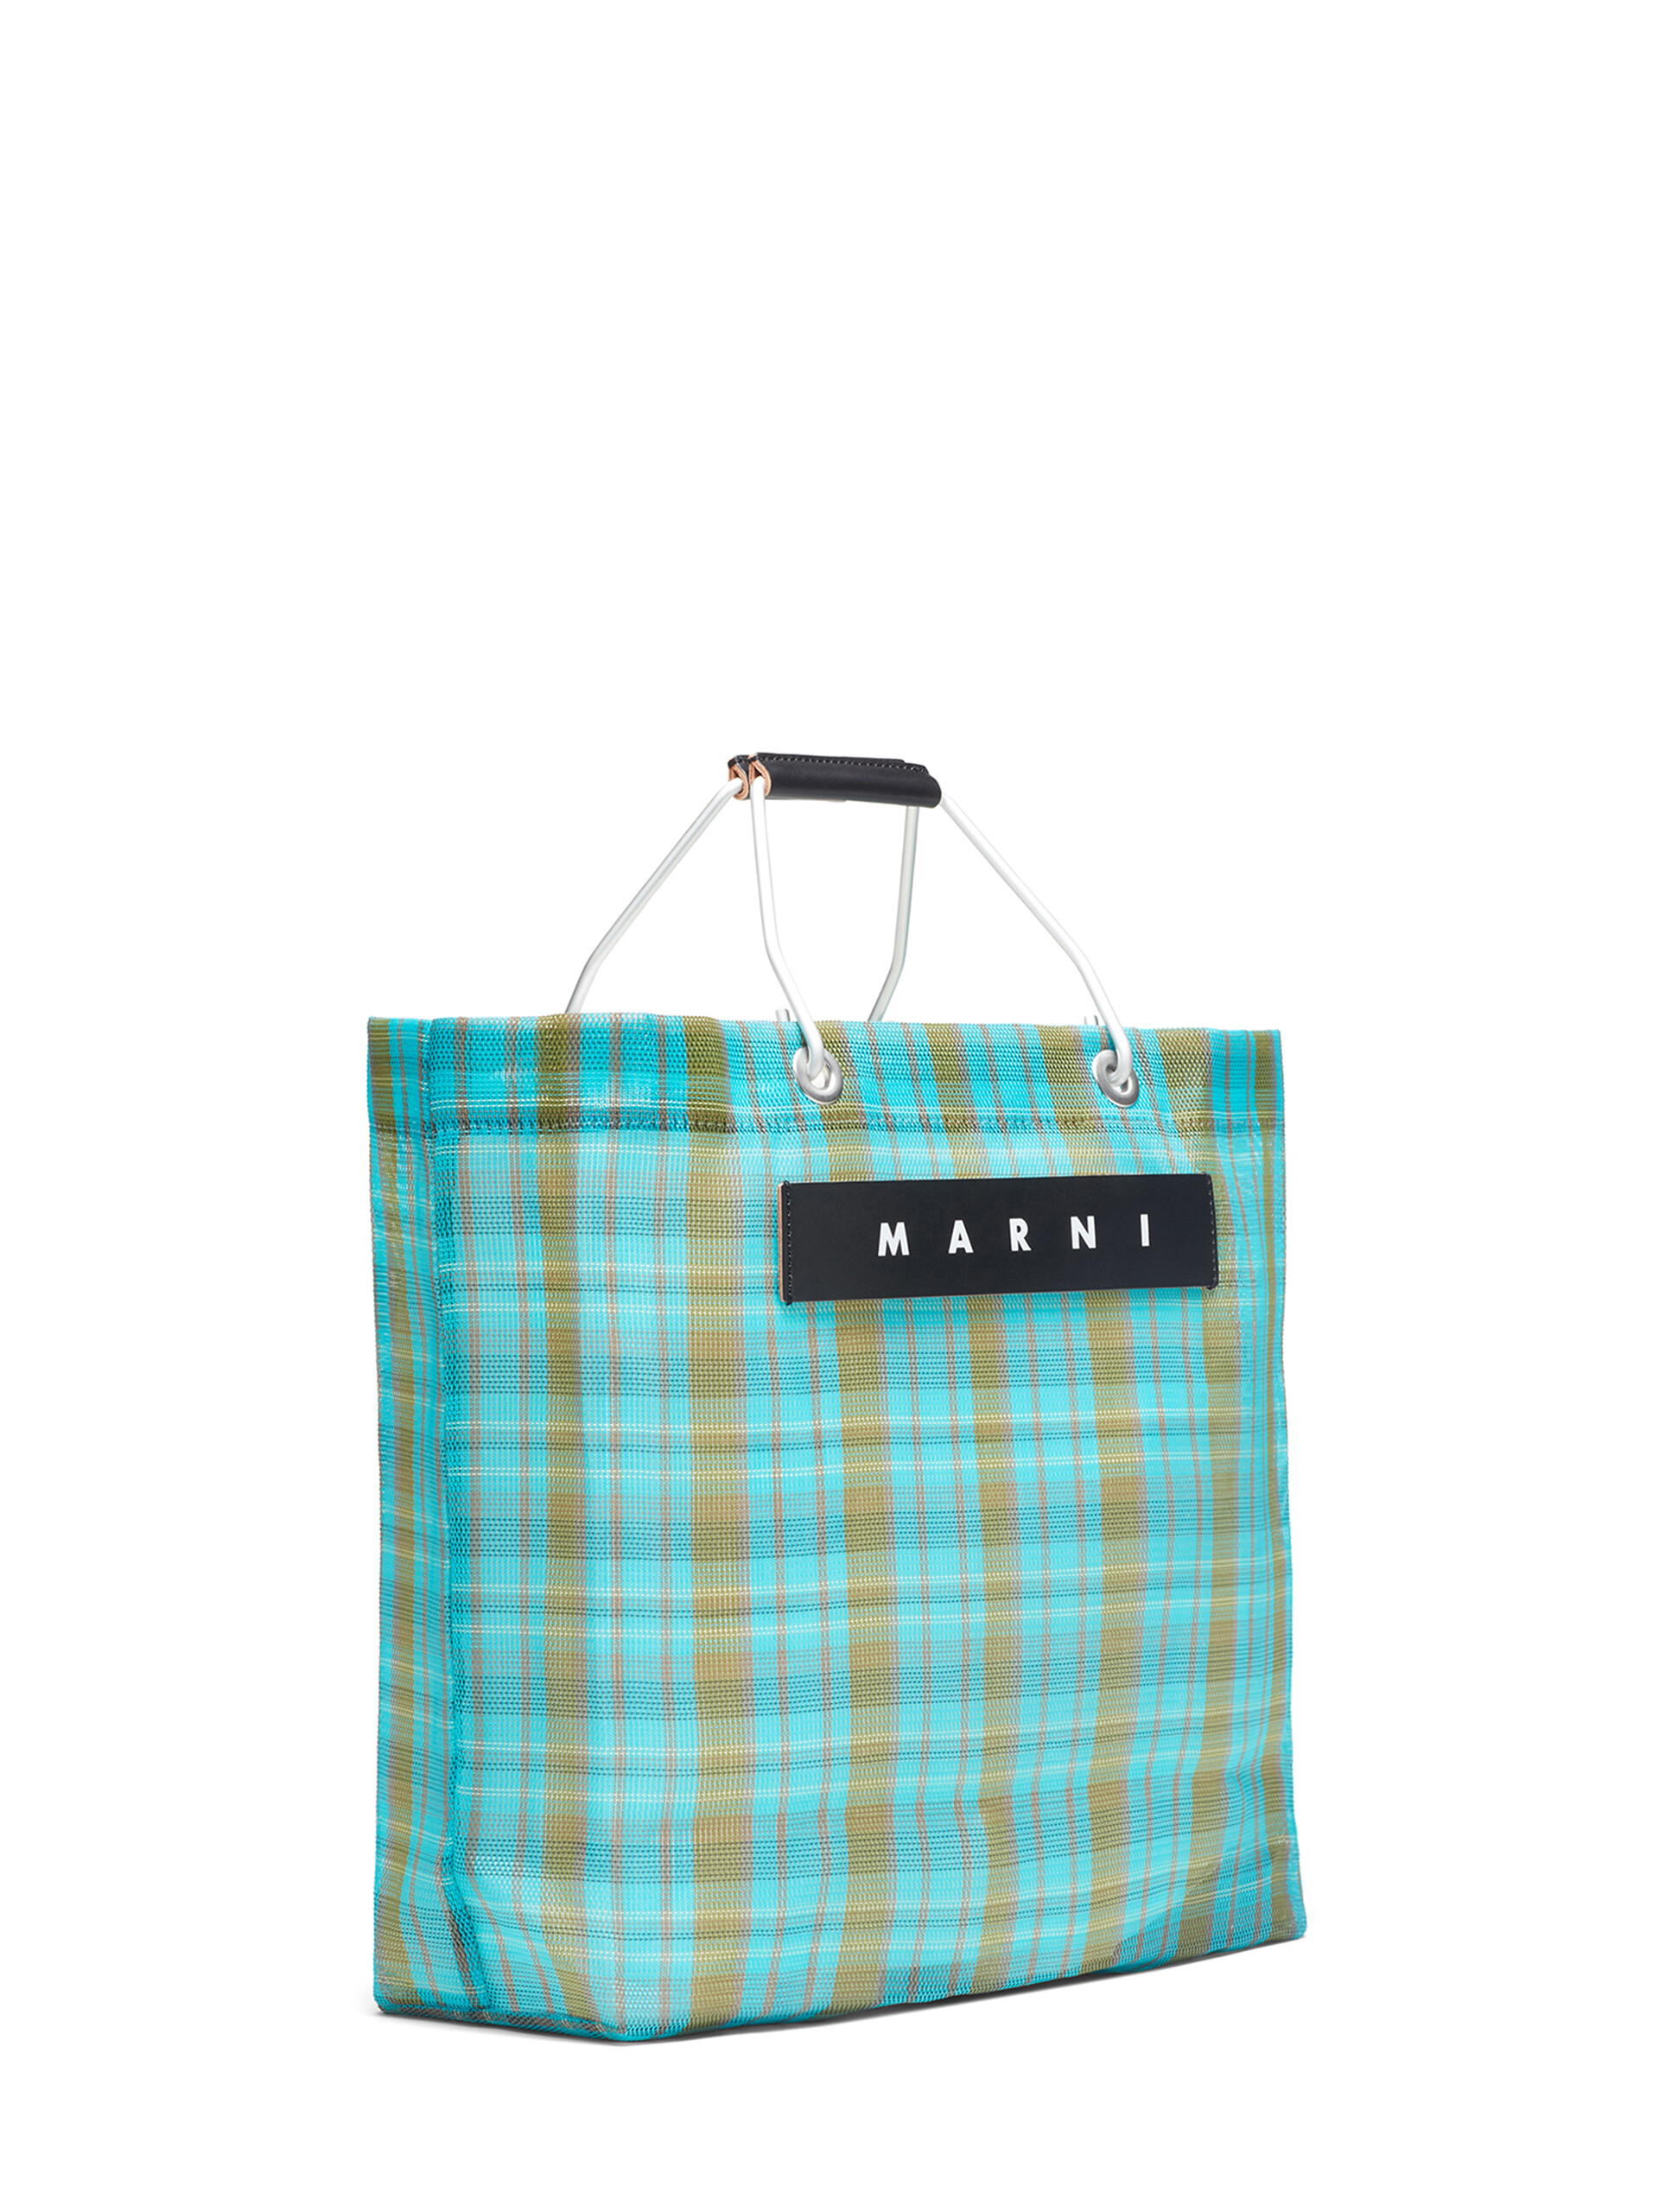 MARNI MARKET bag in pale blue and green - Bags - Image 2